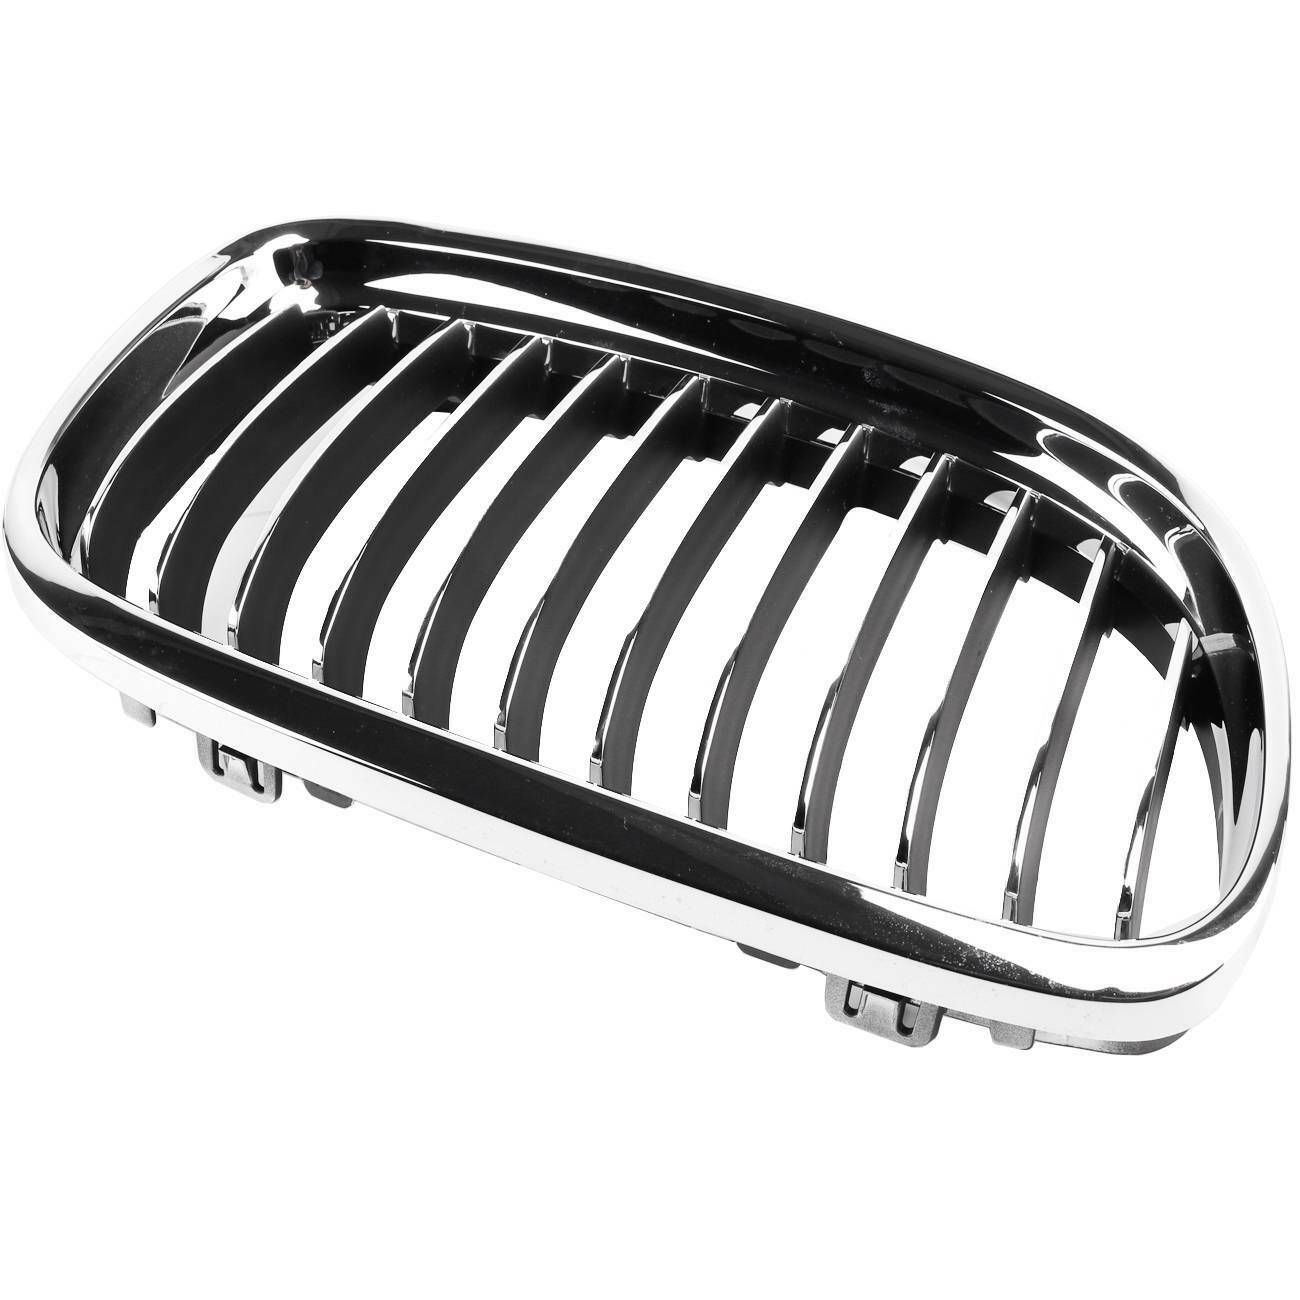 Front Right Chrome Kidney Grille Grill For BMW E90 E91 325i 51137201970 German Made